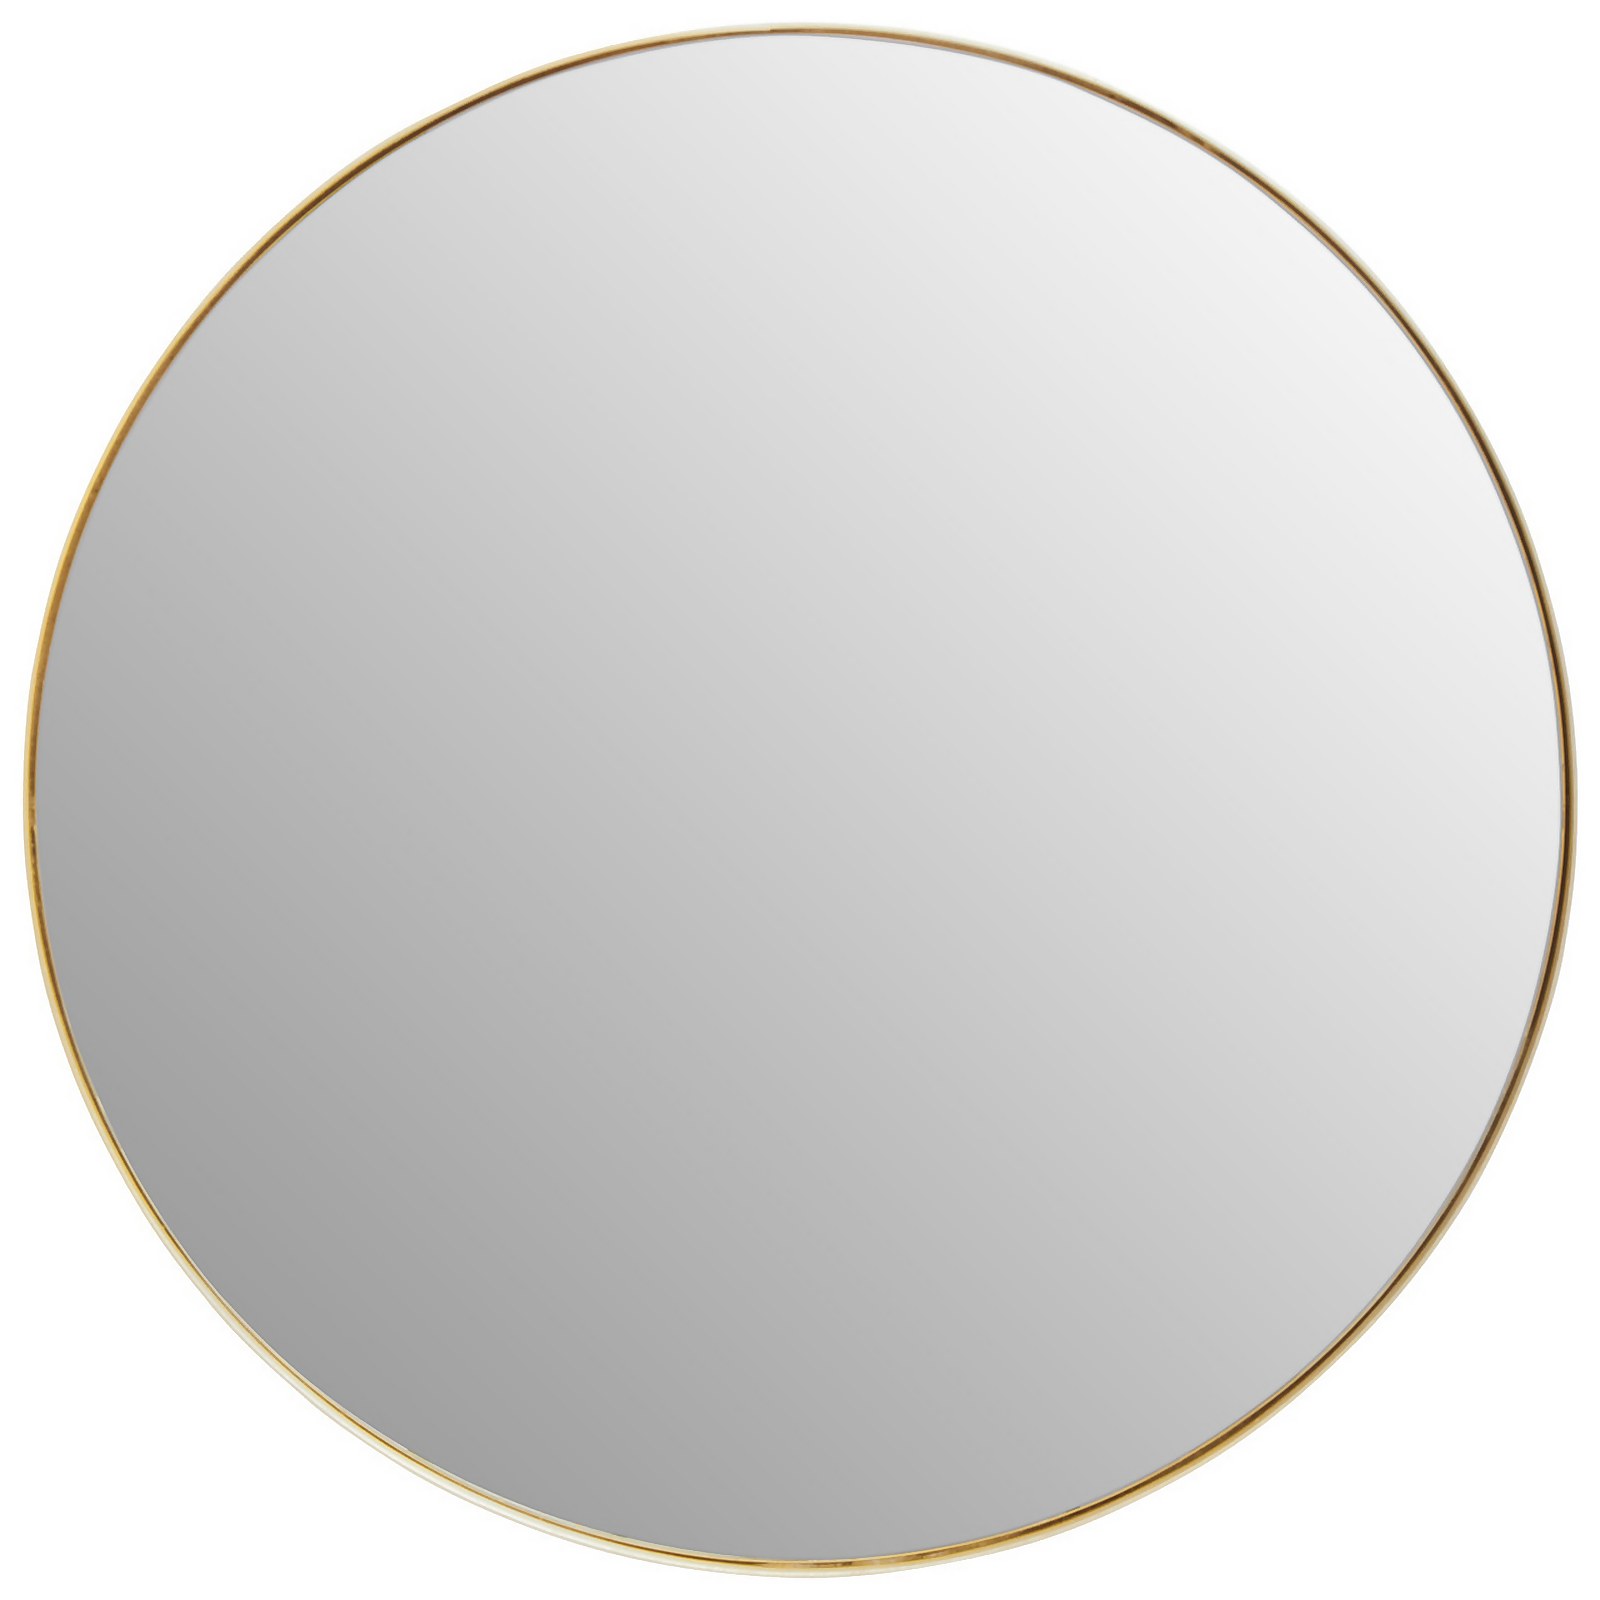 Cindy Large Round Wall Mirror - Gold - 70cm